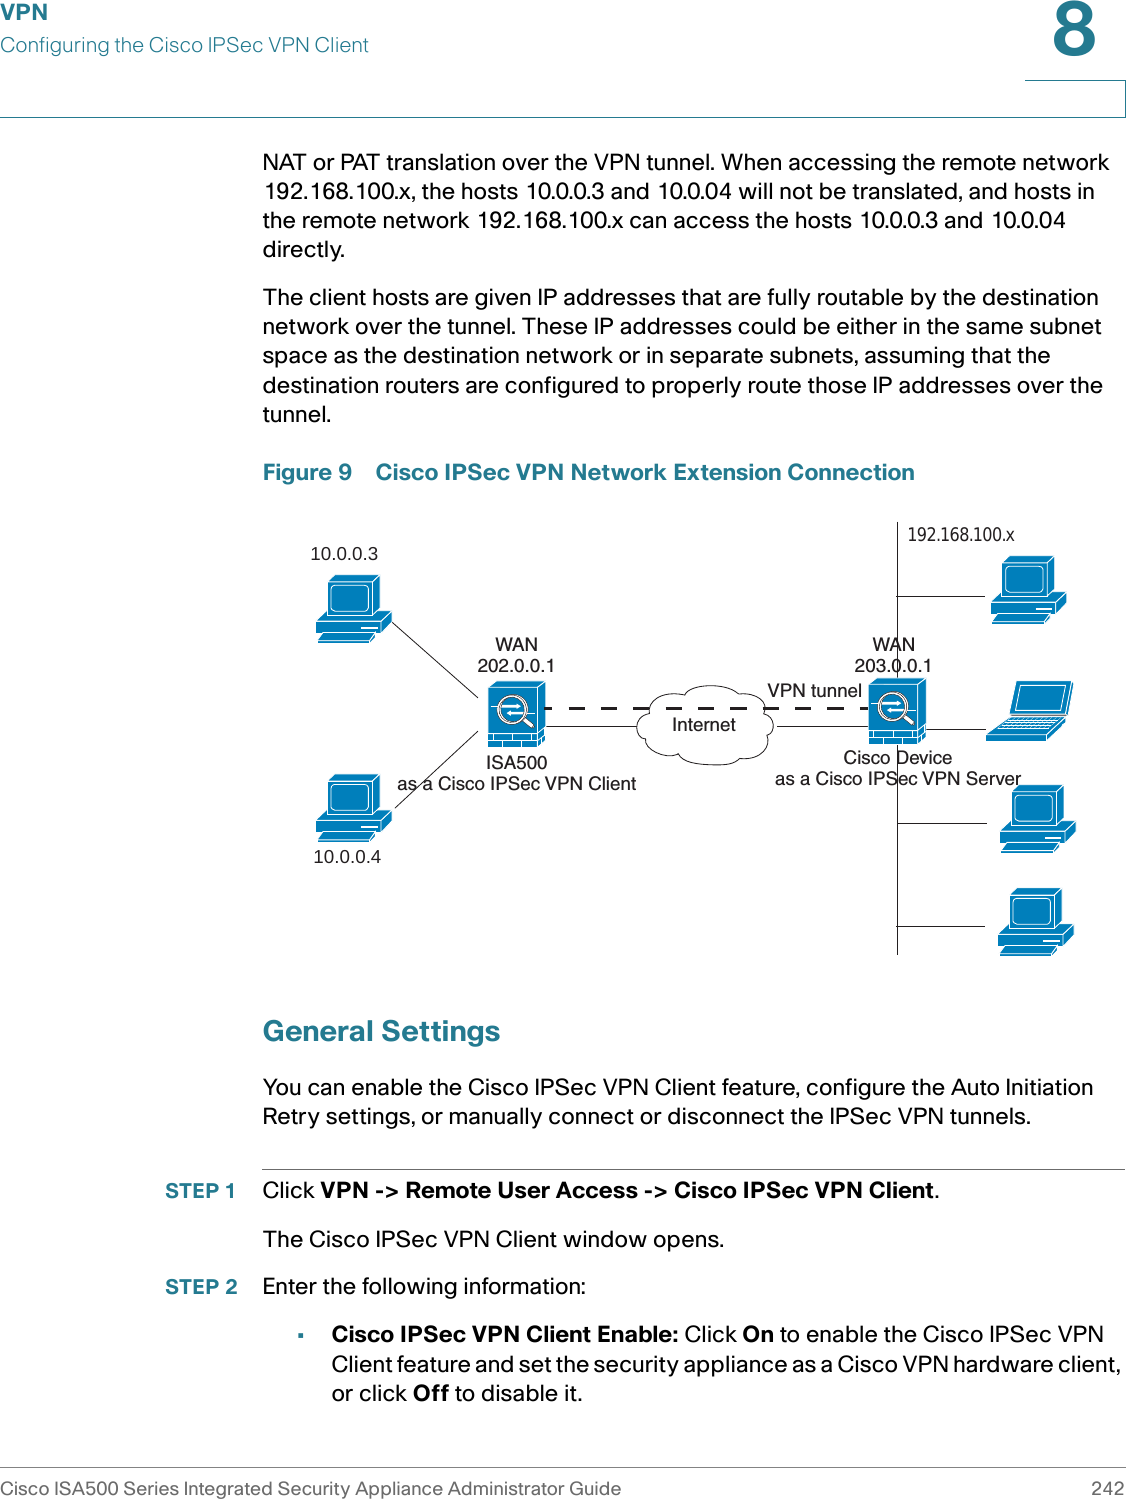 VPNConfiguring the Cisco IPSec VPN ClientCisco ISA500 Series Integrated Security Appliance Administrator Guide 2428 NAT or PAT translation over the VPN tunnel. When accessing the remote network 192.168.100.x, the hosts 10.0.0.3 and 10.0.04 will not be translated, and hosts in the remote network 192.168.100.x can access the hosts 10.0.0.3 and 10.0.04 directly. The client hosts are given IP addresses that are fully routable by the destination network over the tunnel. These IP addresses could be either in the same subnet space as the destination network or in separate subnets, assuming that the destination routers are configured to properly route those IP addresses over the tunnel. Figure 9 Cisco IPSec VPN Network Extension ConnectionGeneral SettingsYou can enable the Cisco IPSec VPN Client feature, configure the Auto Initiation Retry settings, or manually connect or disconnect the IPSec VPN tunnels.STEP 1 Click VPN -&gt; Remote User Access -&gt; Cisco IPSec VPN Client.The Cisco IPSec VPN Client window opens. STEP 2 Enter the following information: •Cisco IPSec VPN Client Enable: Click On to enable the Cisco IPSec VPN Client feature and set the security appliance as a Cisco VPN hardware client, or click Off to disable it. ISA500as a Cisco IPSec VPN Client10.0.0.310.0.0.4InternetCisco Deviceas a Cisco IPSec VPN Server192.168.100.x VPN tunnelWAN202.0.0.1WAN203.0.0.1